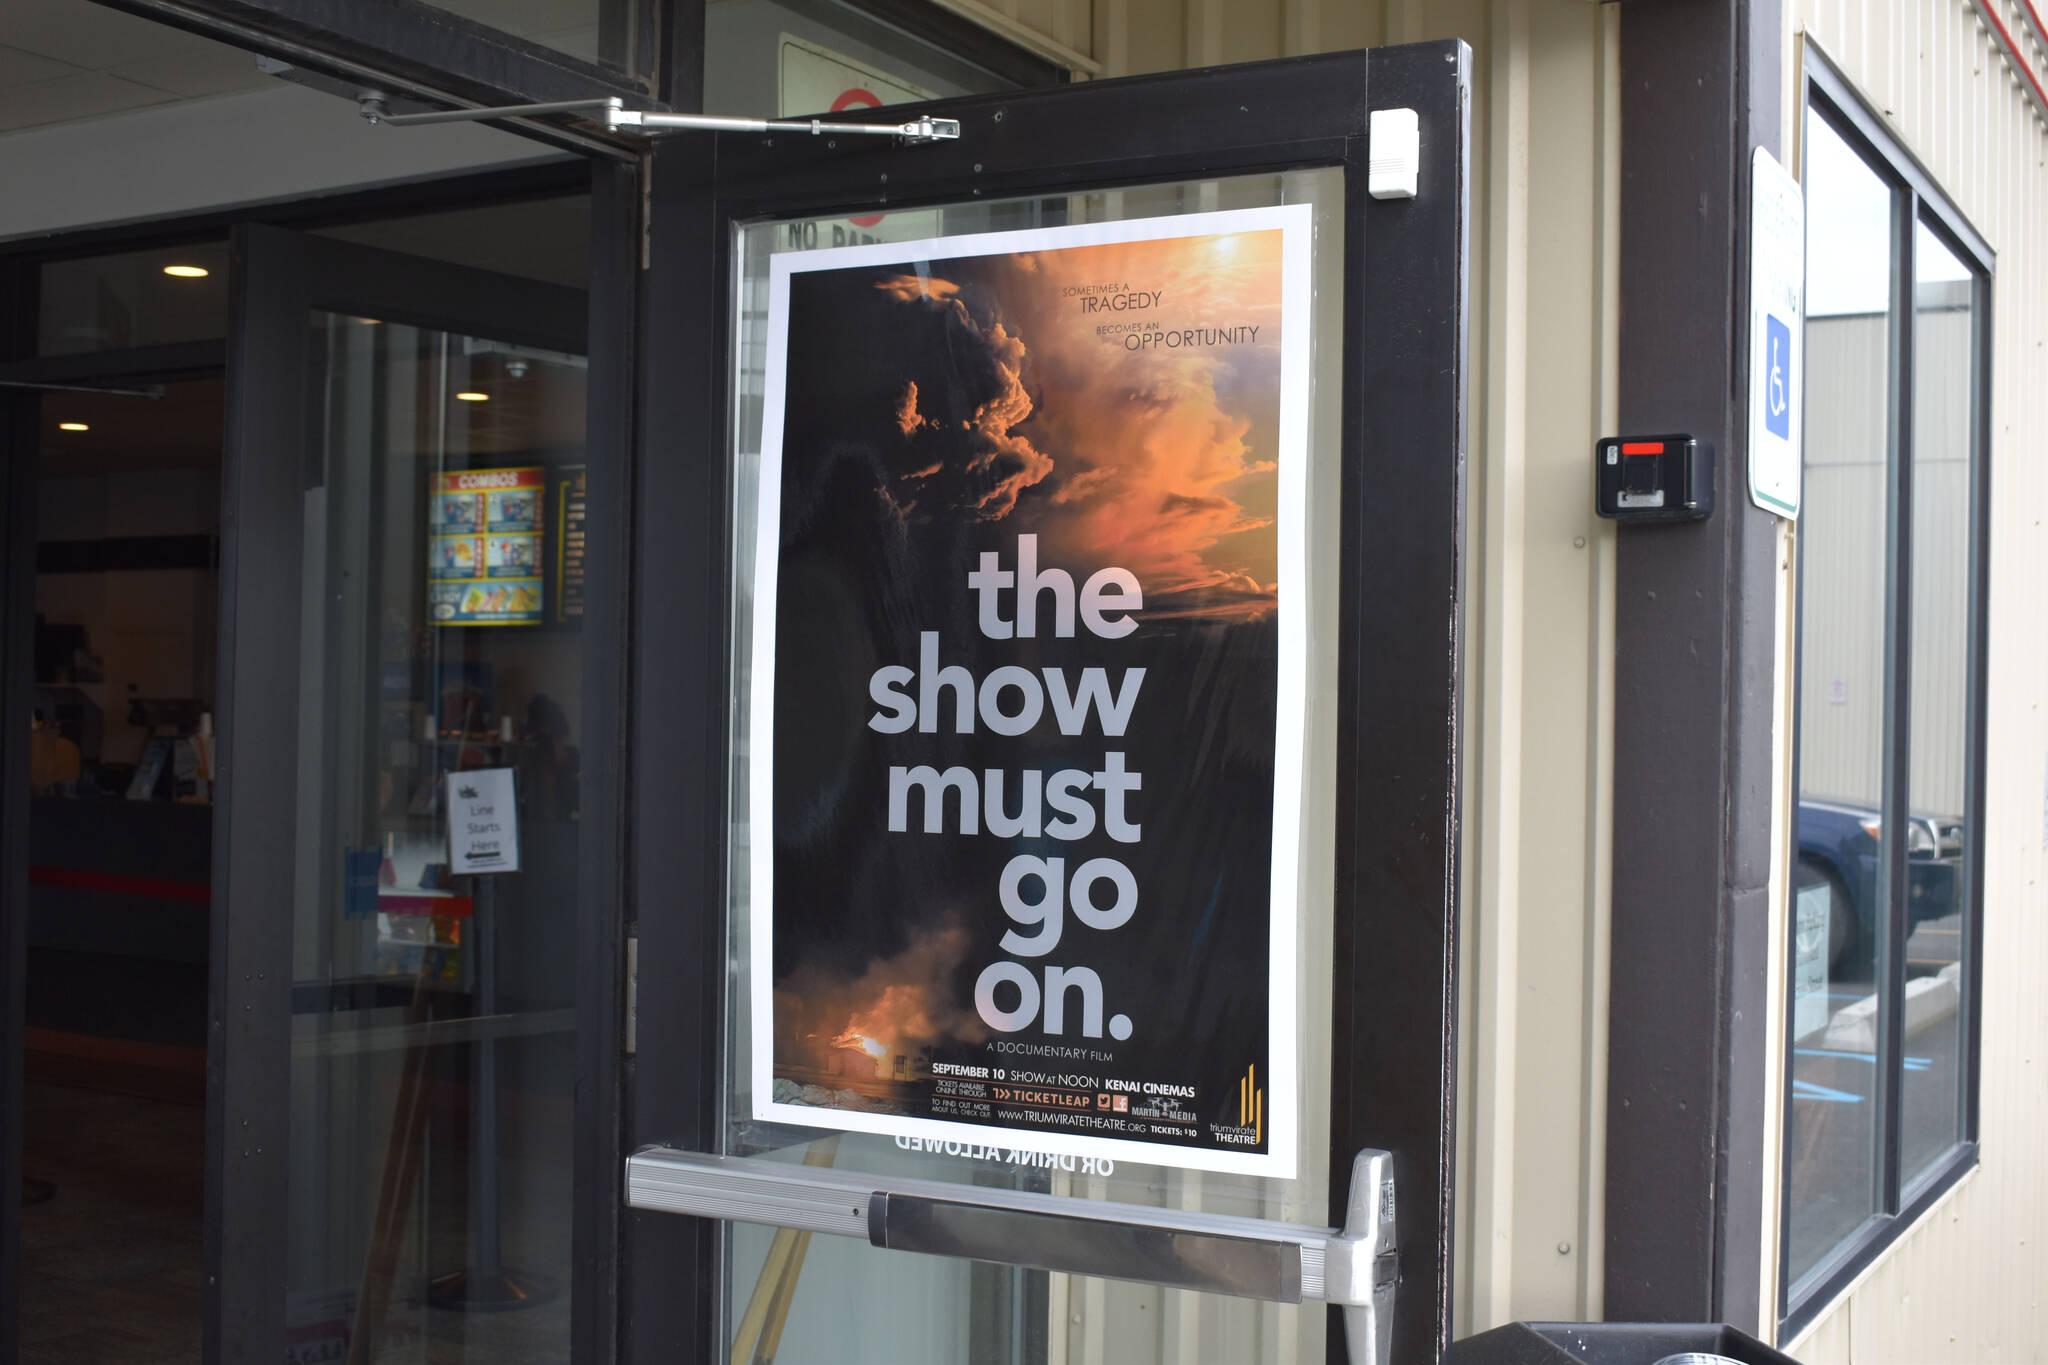 A poster for “The Show Must Go On” is displayed at the Kenai Cinema on Tuesday, Sept. 6, 2022, in Kenai, Alaska. (Jake Dye/Peninsula Clarion)